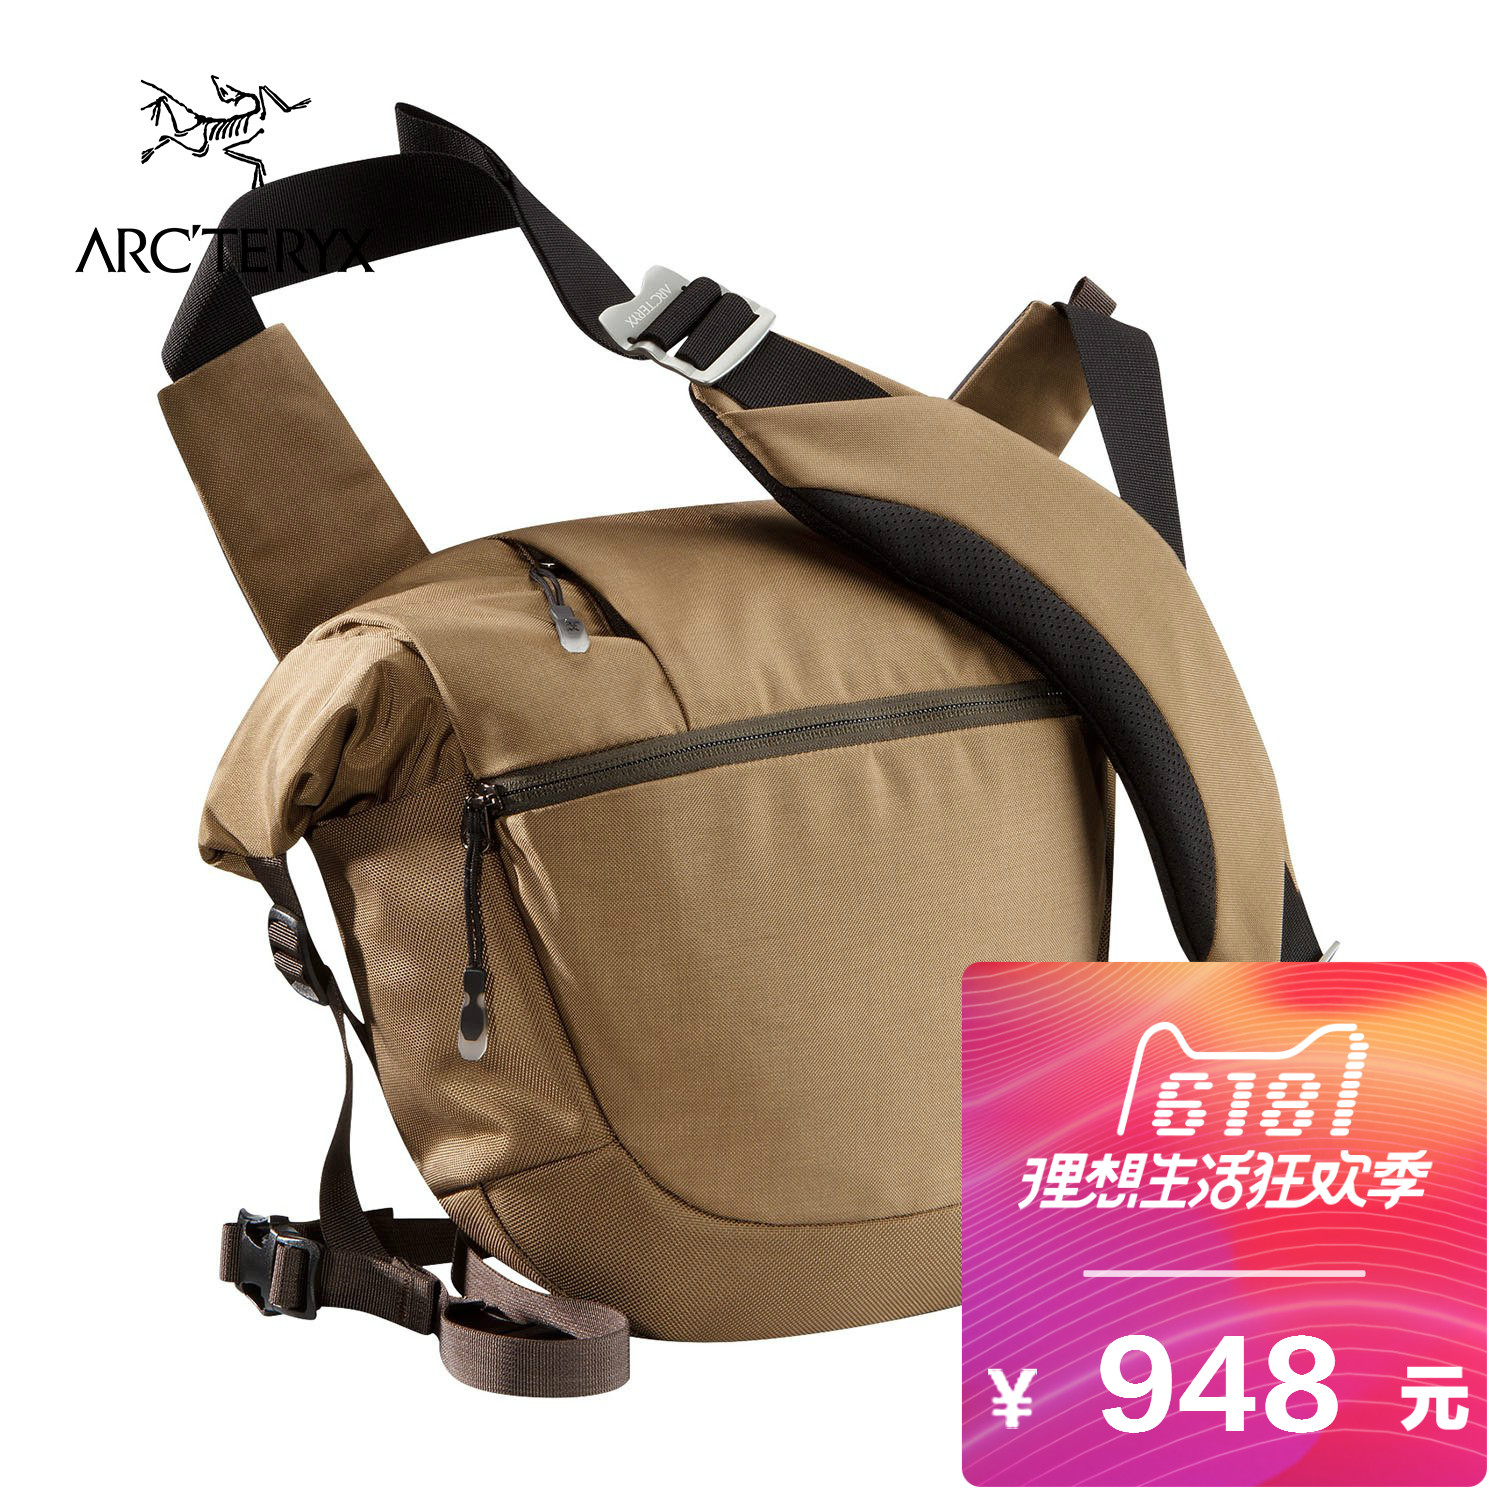 Arcteryx/Archaeopteryx Mistral 8L 6779 for commuting trips in small cities in spring and summer